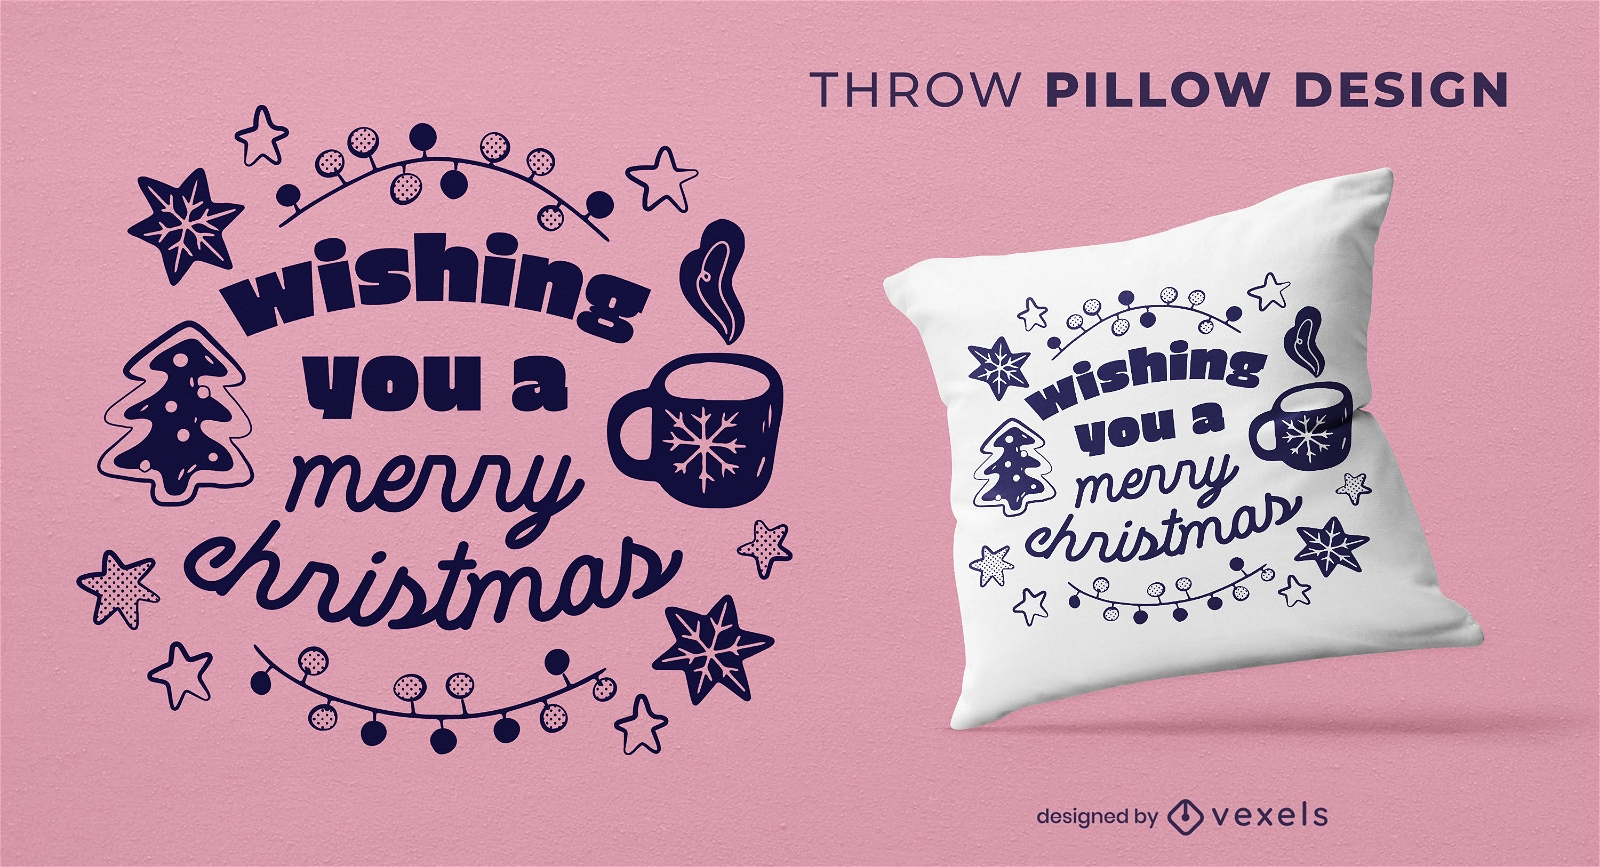 Christmas holiday quote throw pillow design